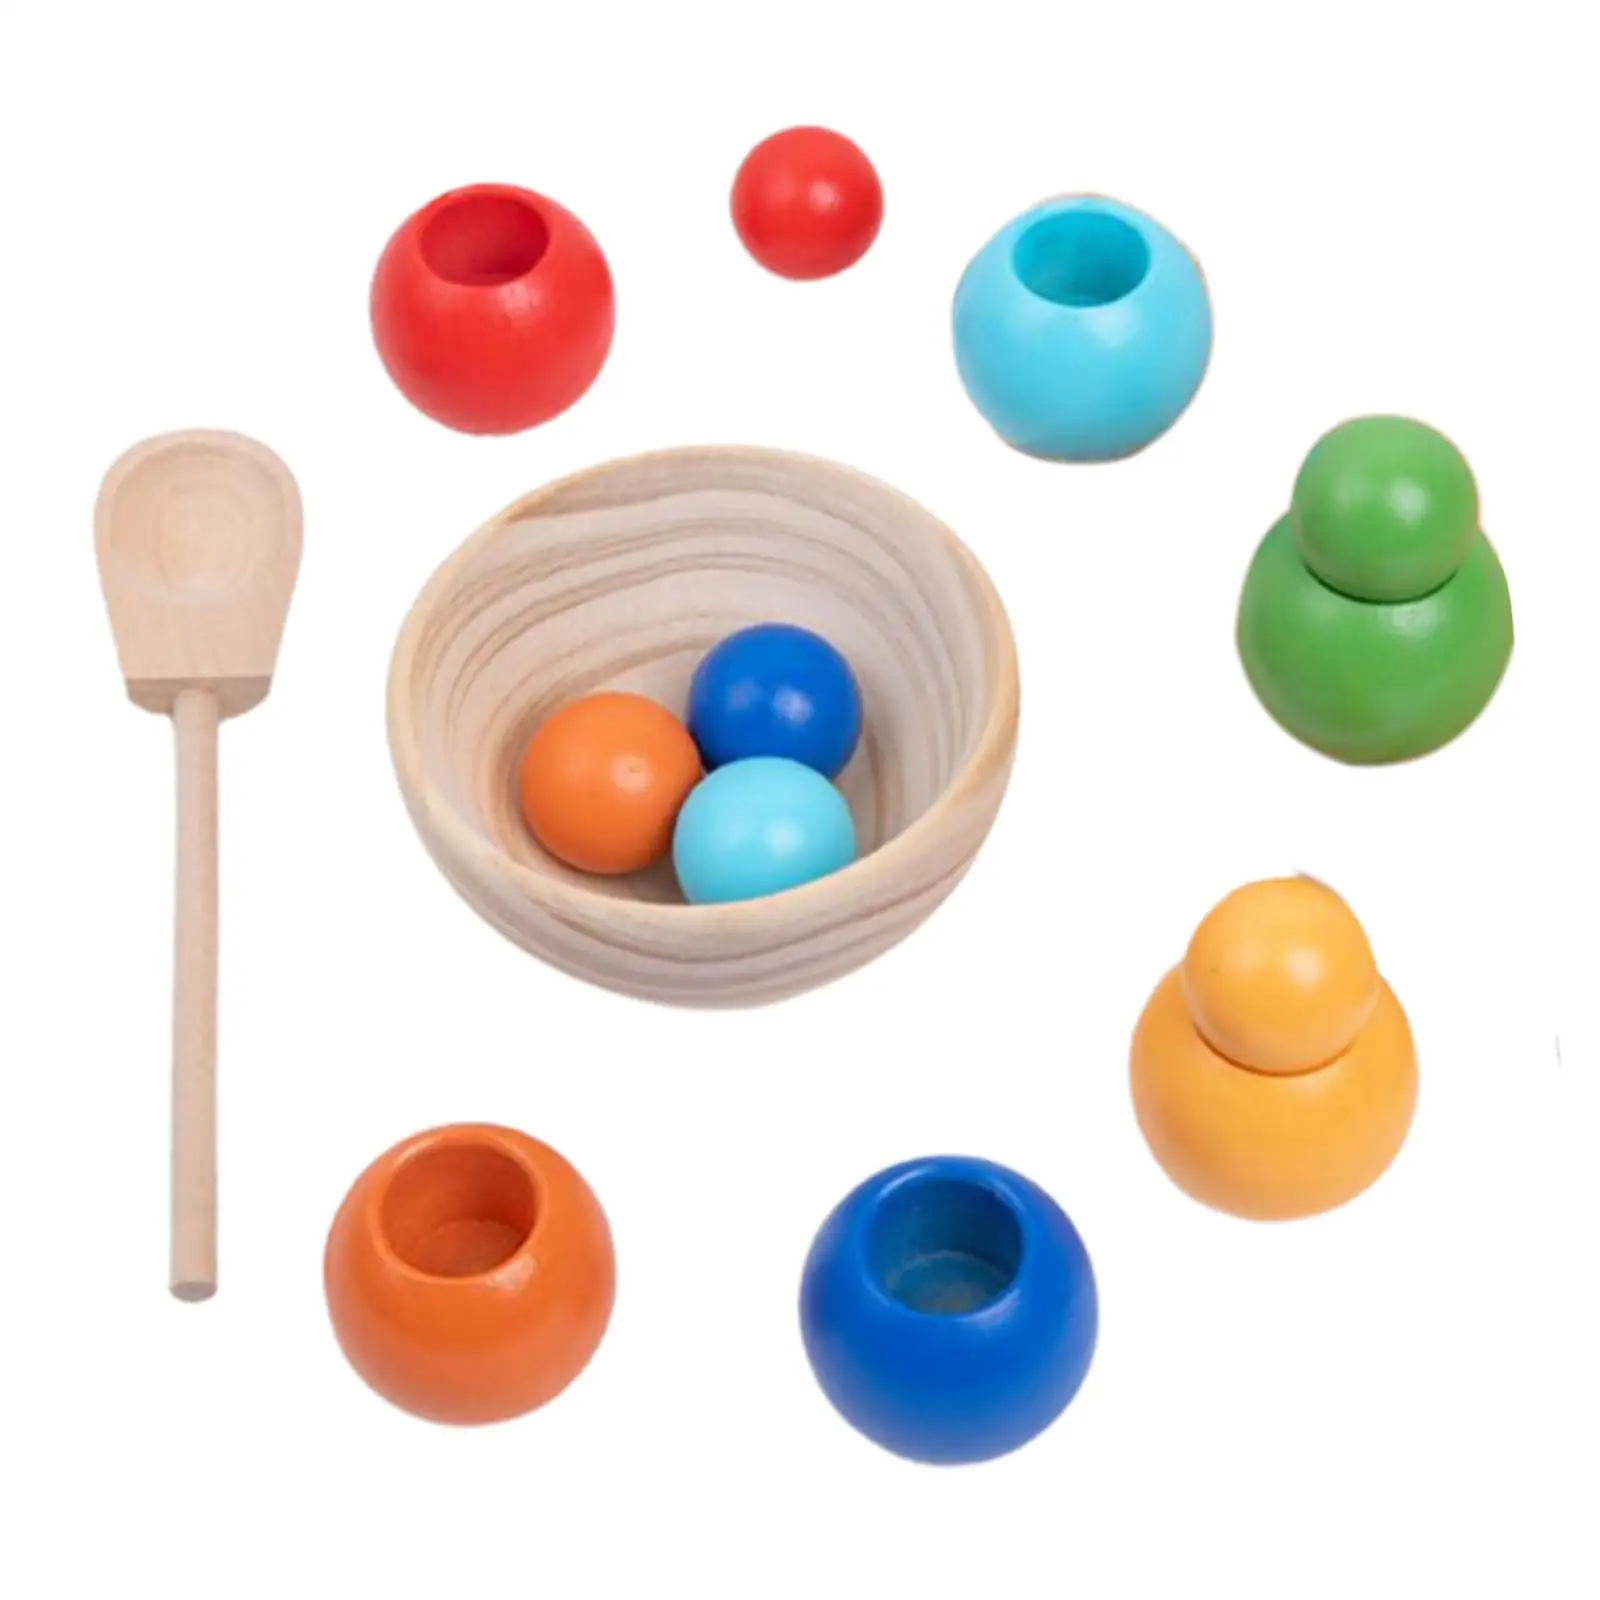 Balls in Cups Montessori Toy Board Game Preschool Learning Toy for Toddlers Baby Early Education Toys Matching and Counting Toy